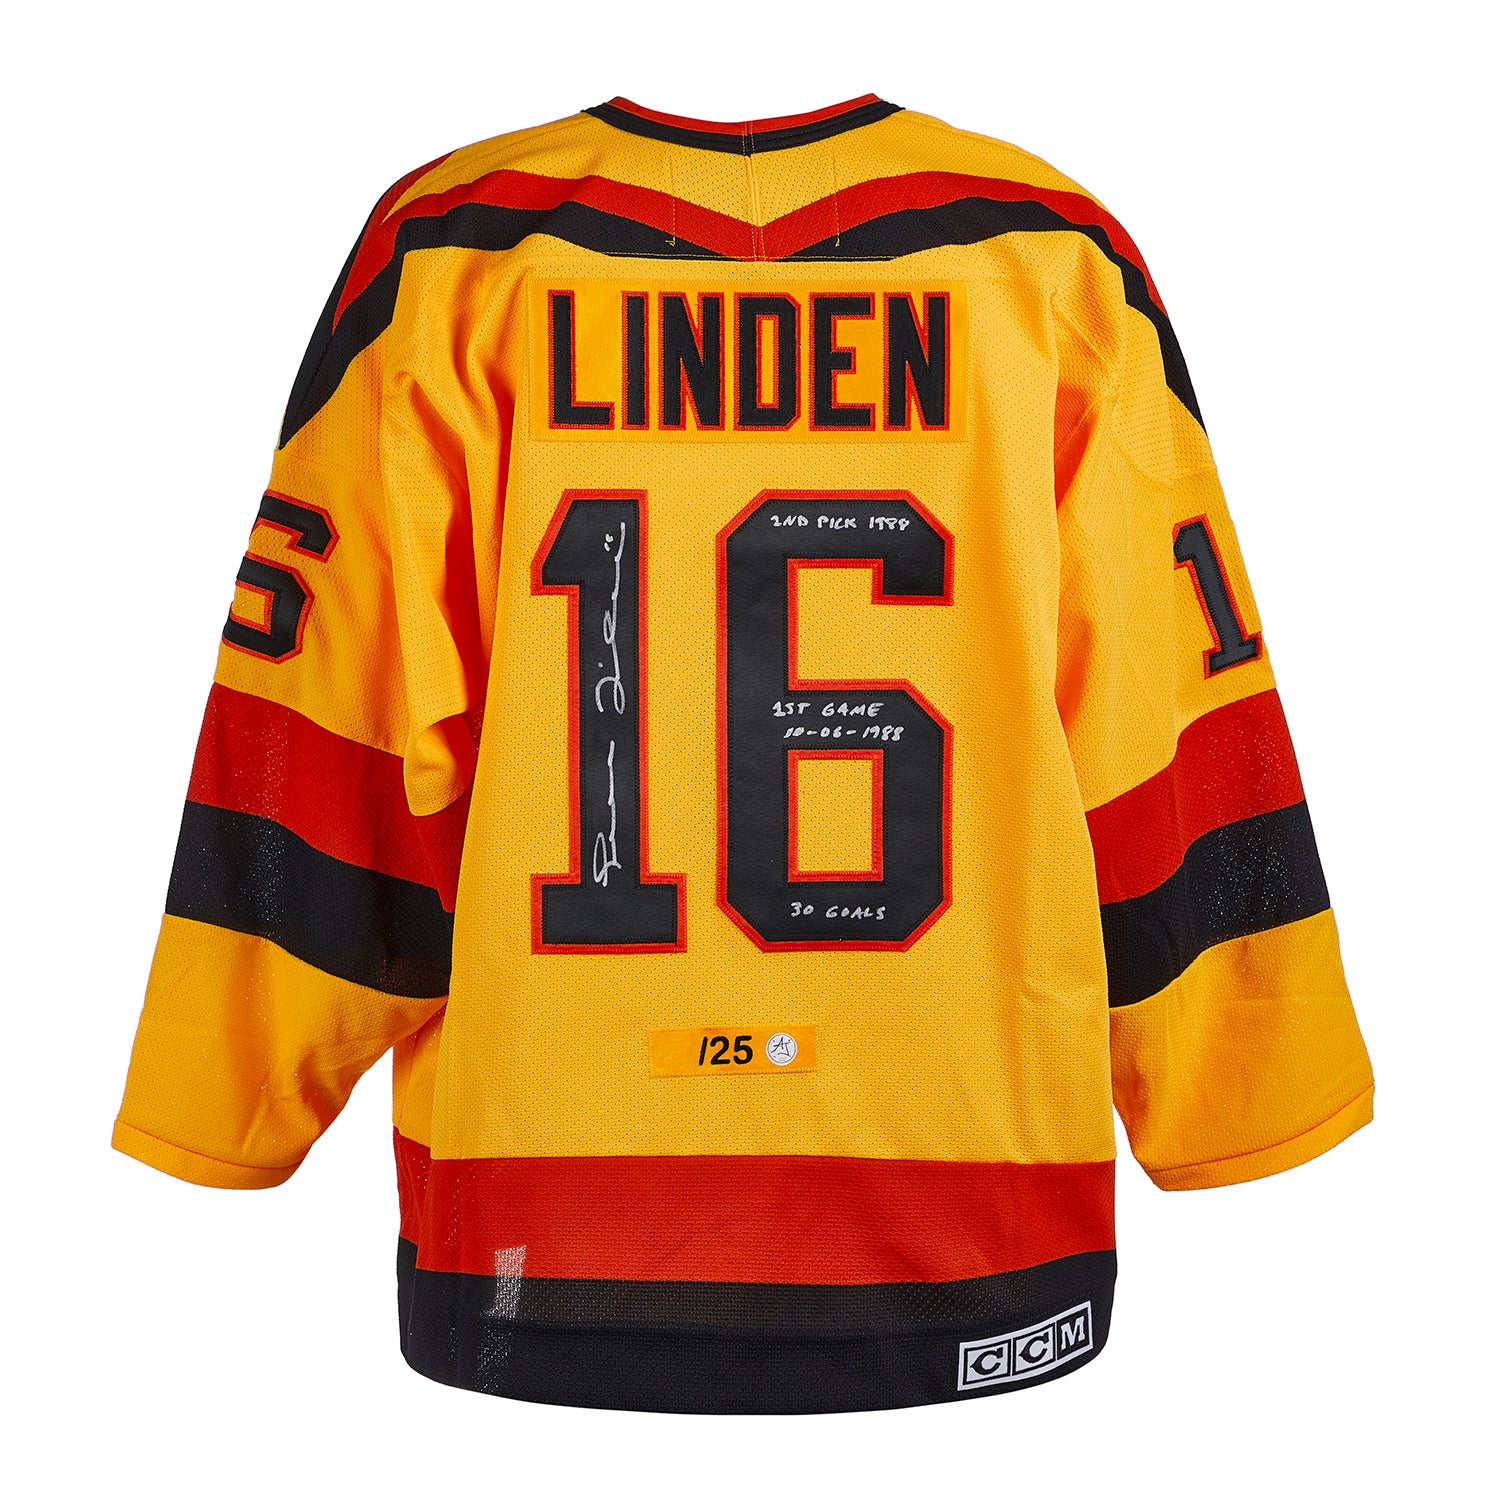 Best Signed Trevor Linden Jersey for sale in Trail, British Columbia for  2023